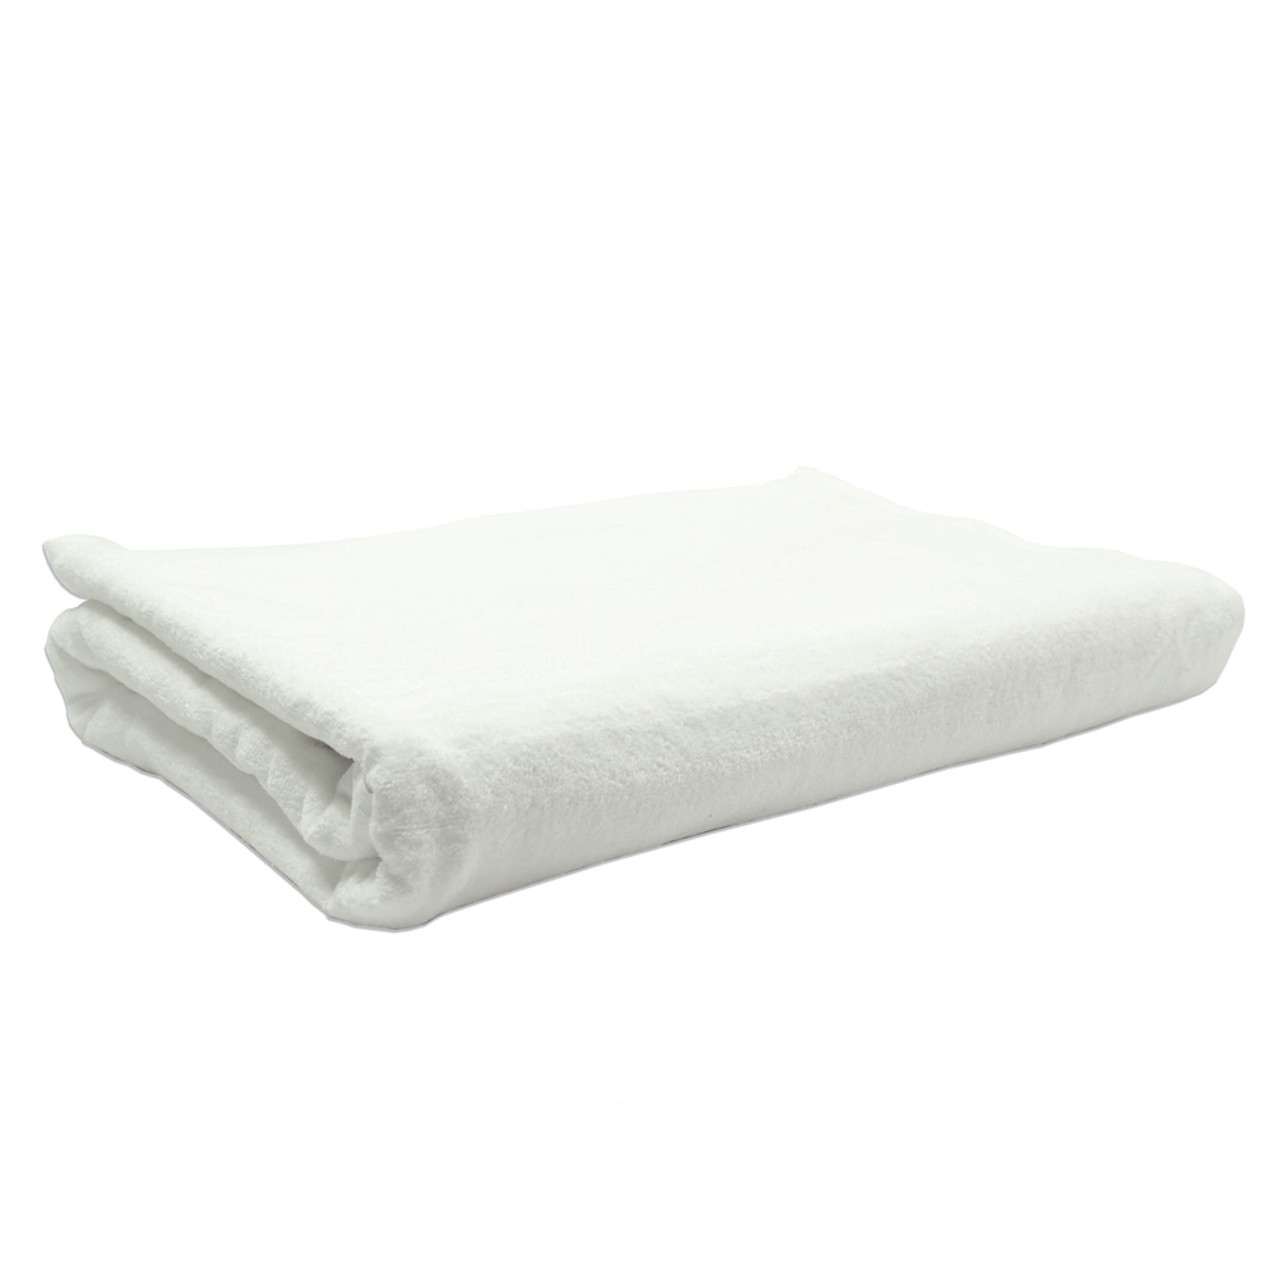 Wholesale Towels > 35x70 - White Full Terry Oversized Large Bath Sheet  Towels Heavy Weight 100% Cotton